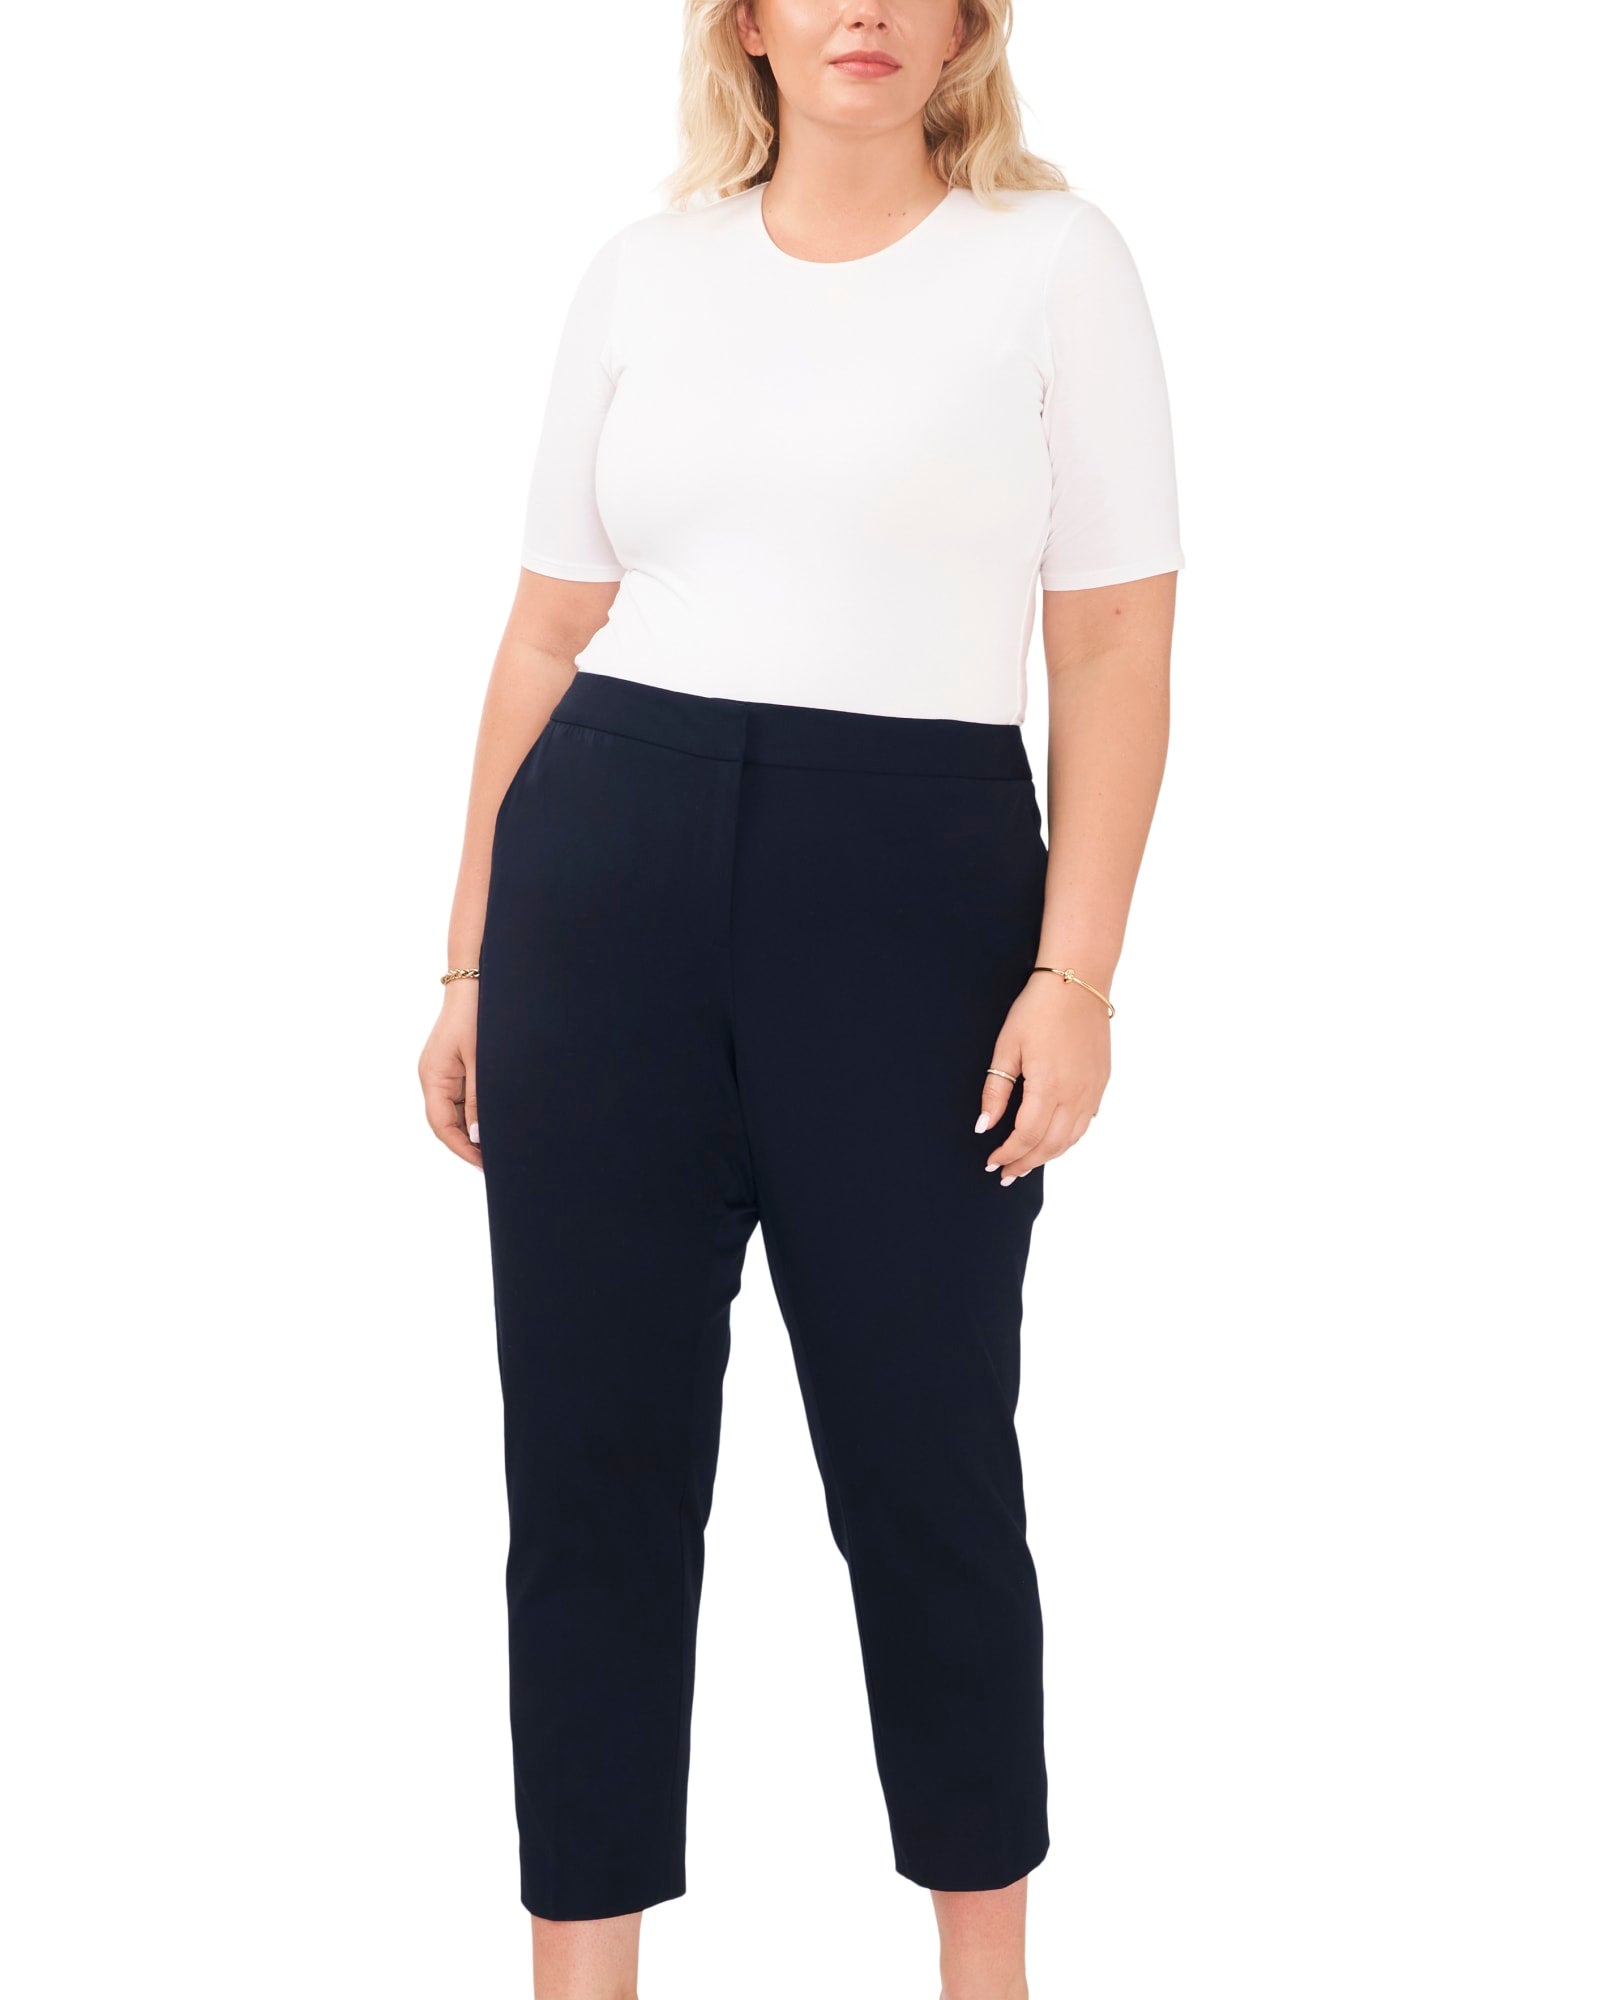 10 Best Plus-Size Black Work Pants For Women 2023 The, 58% OFF